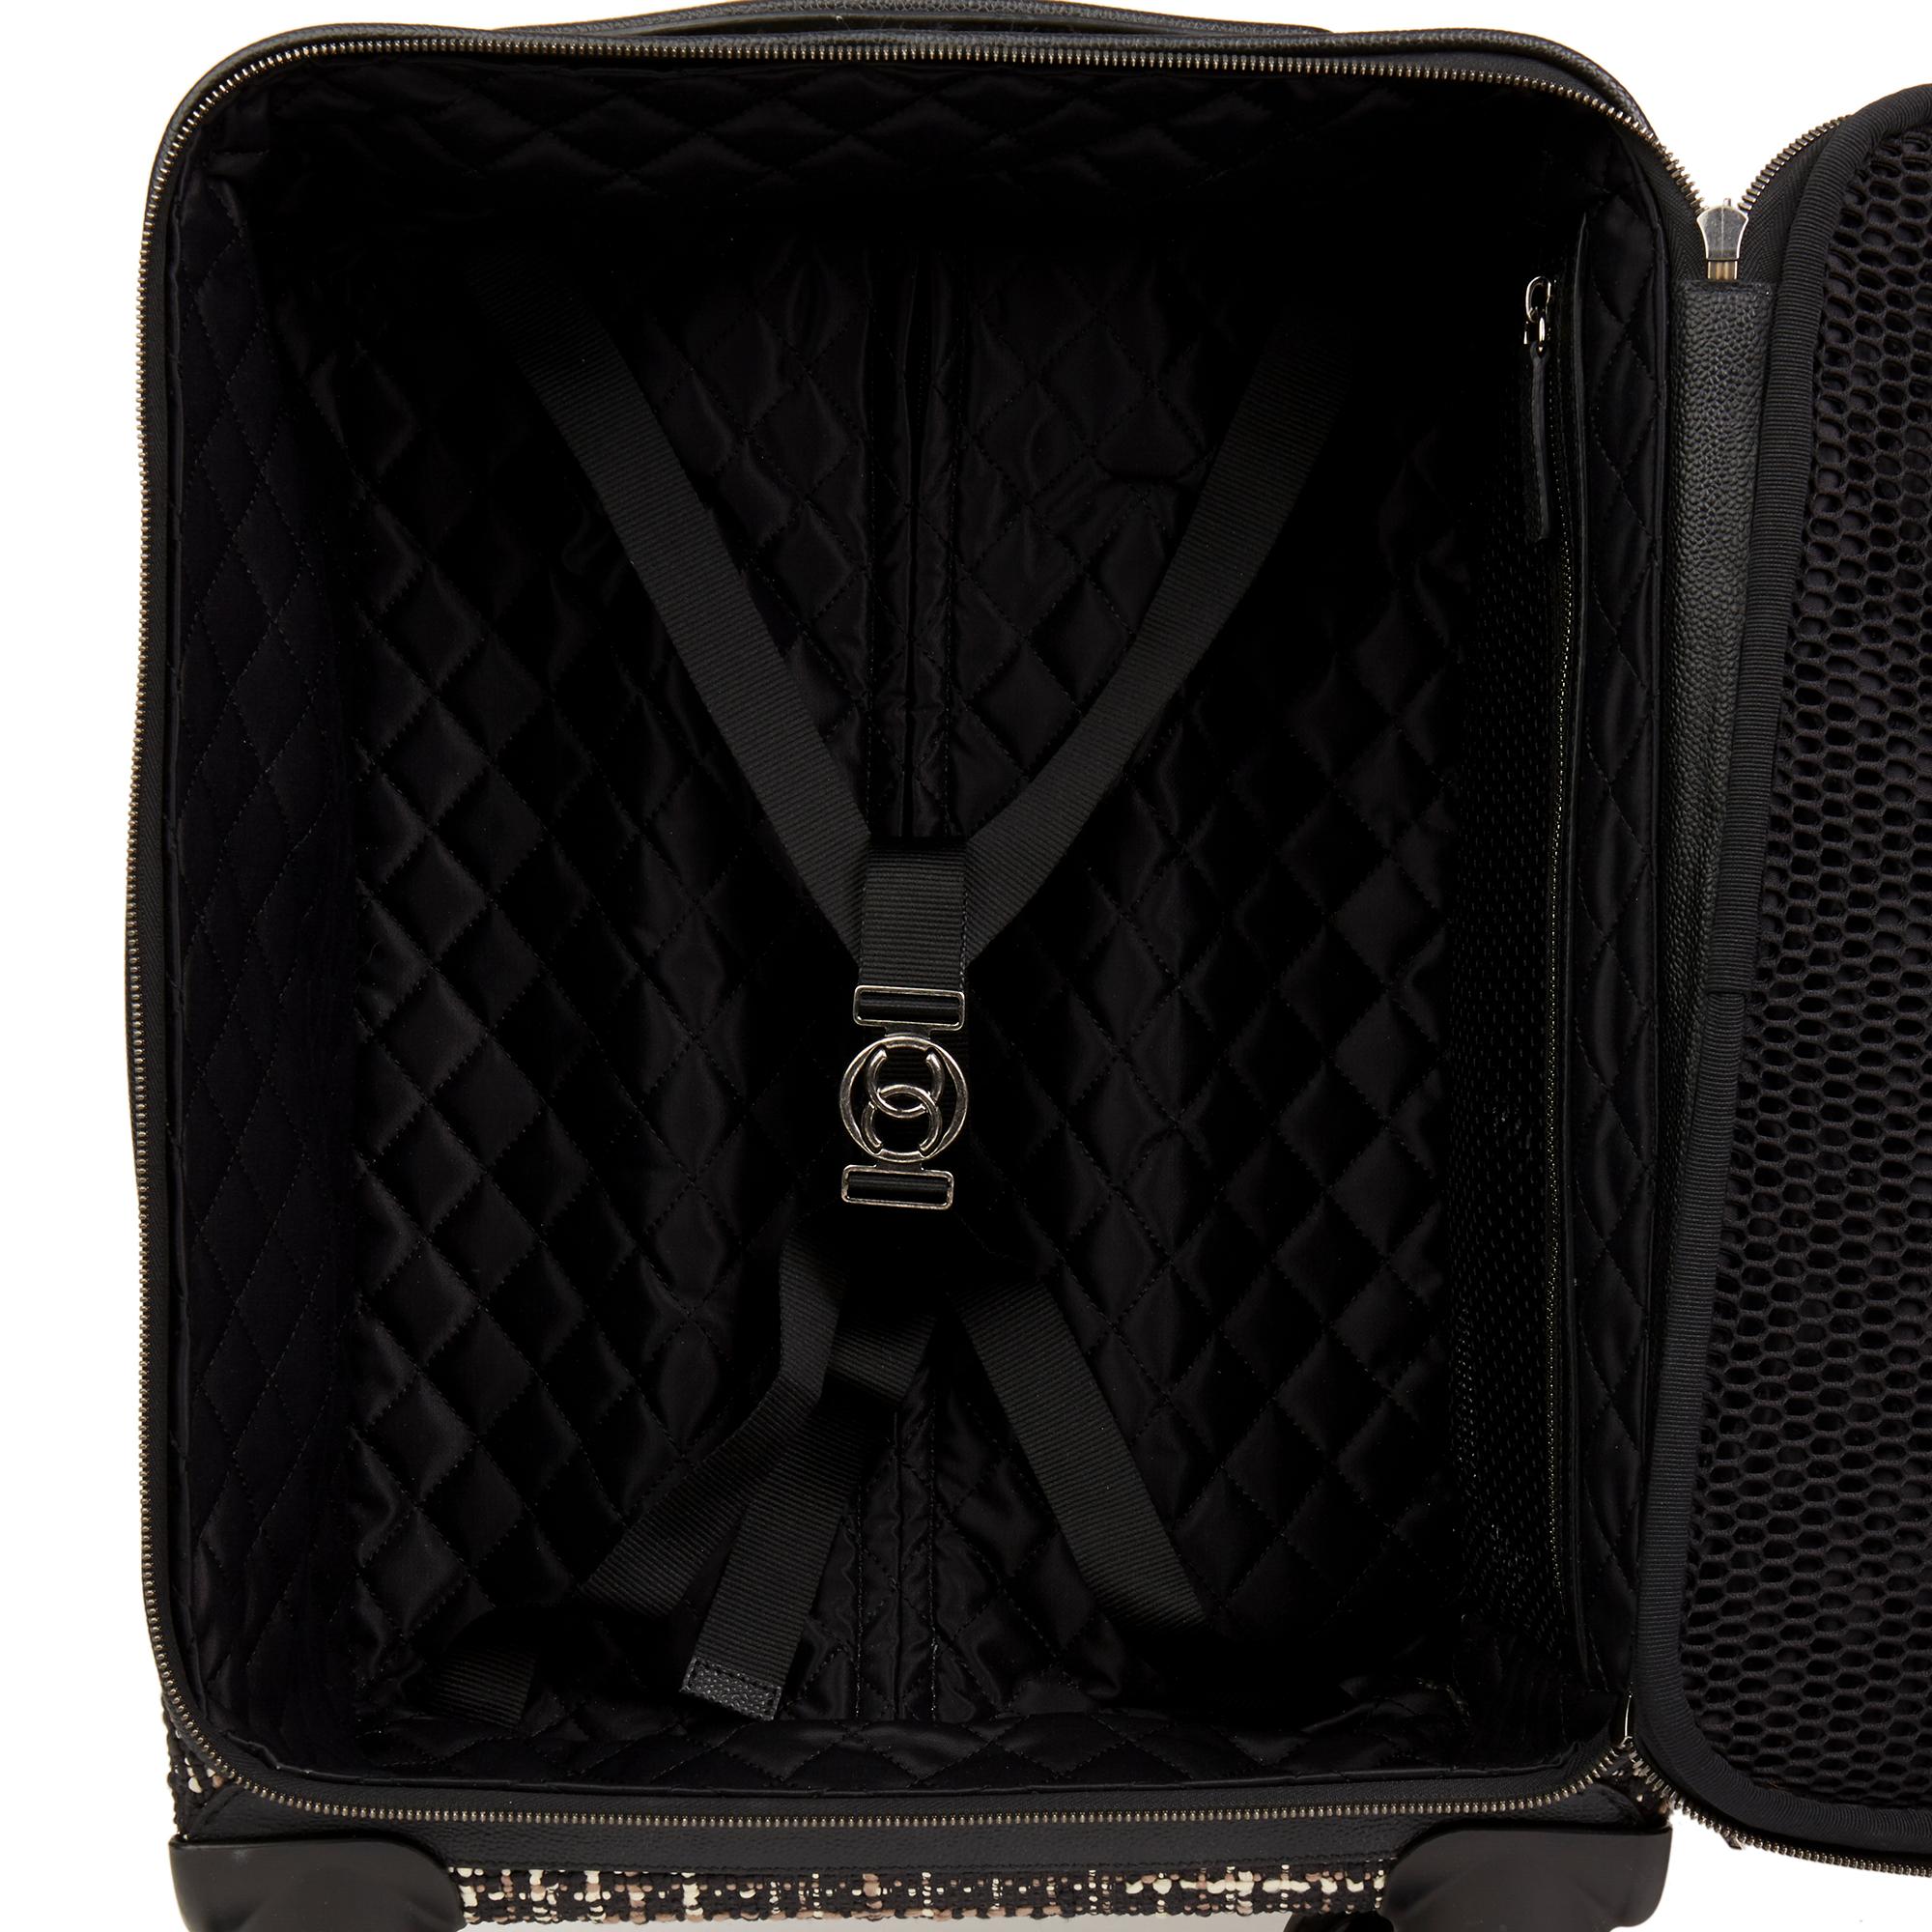 2016 Chanel Black Tweed & Caviar Leather Jacket Trolley Rolling Suitcase 3